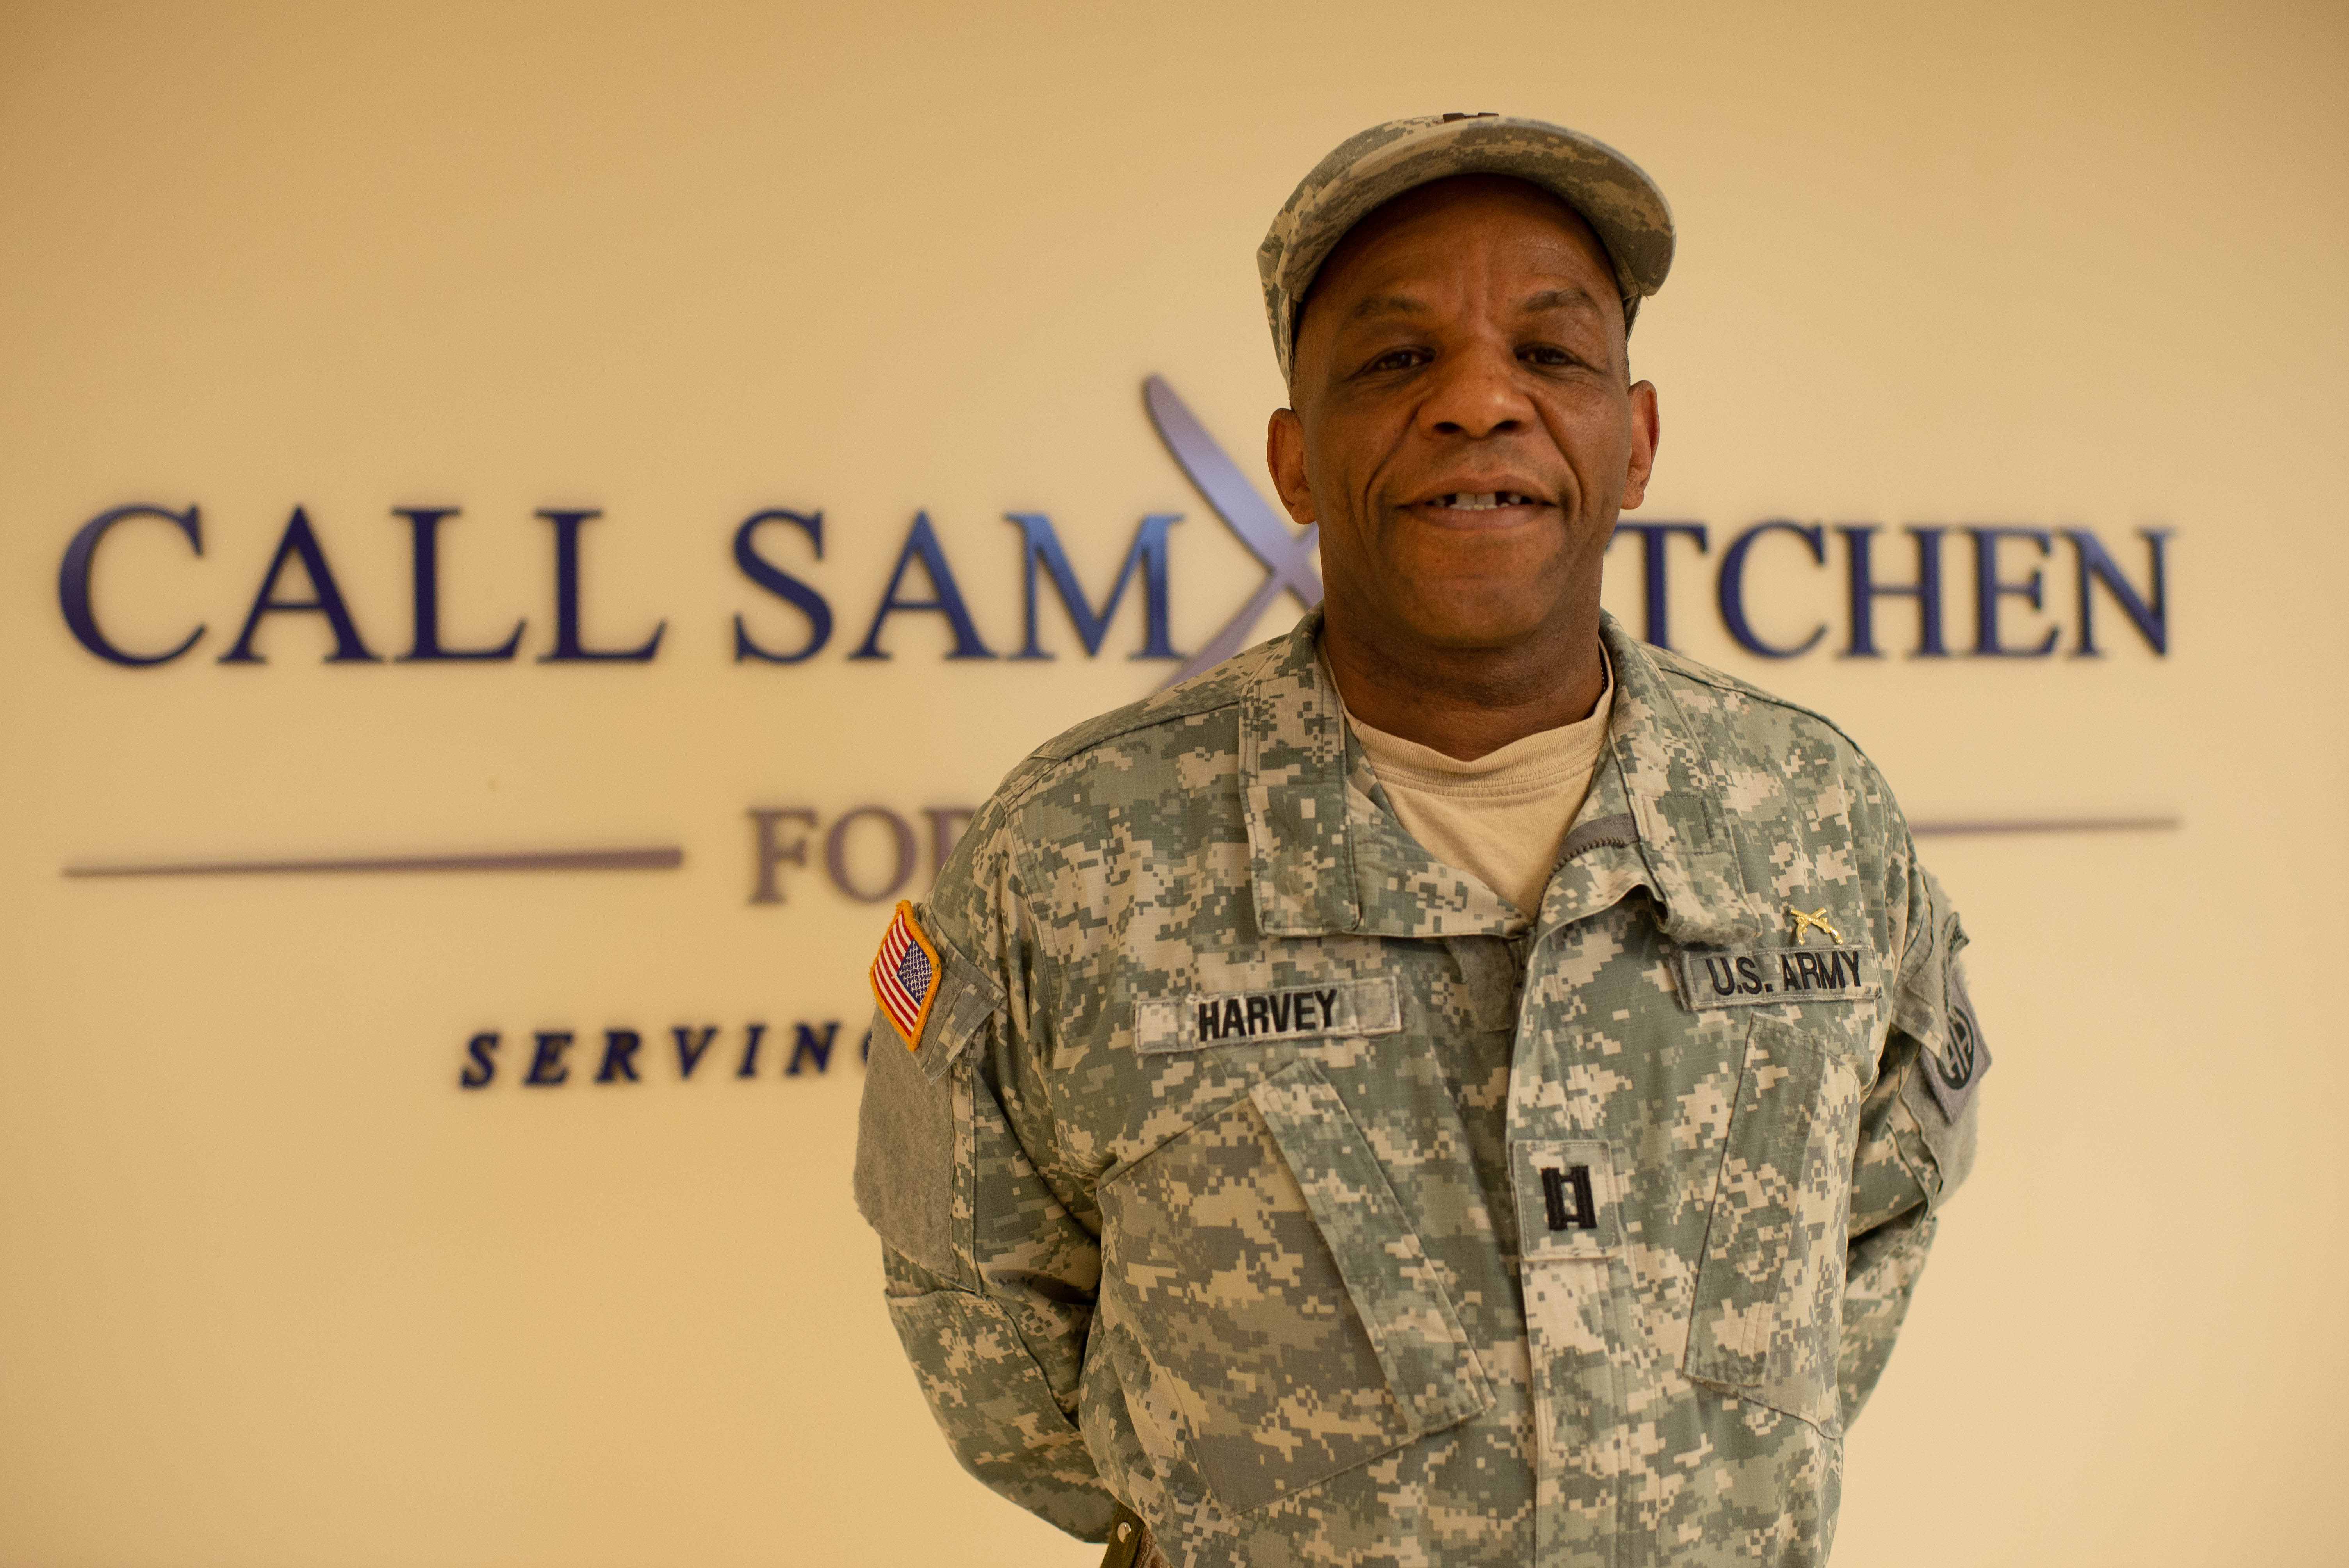 Military Veteran standing in uniform in front of the Call Sam Kitchen for Veterans Sign